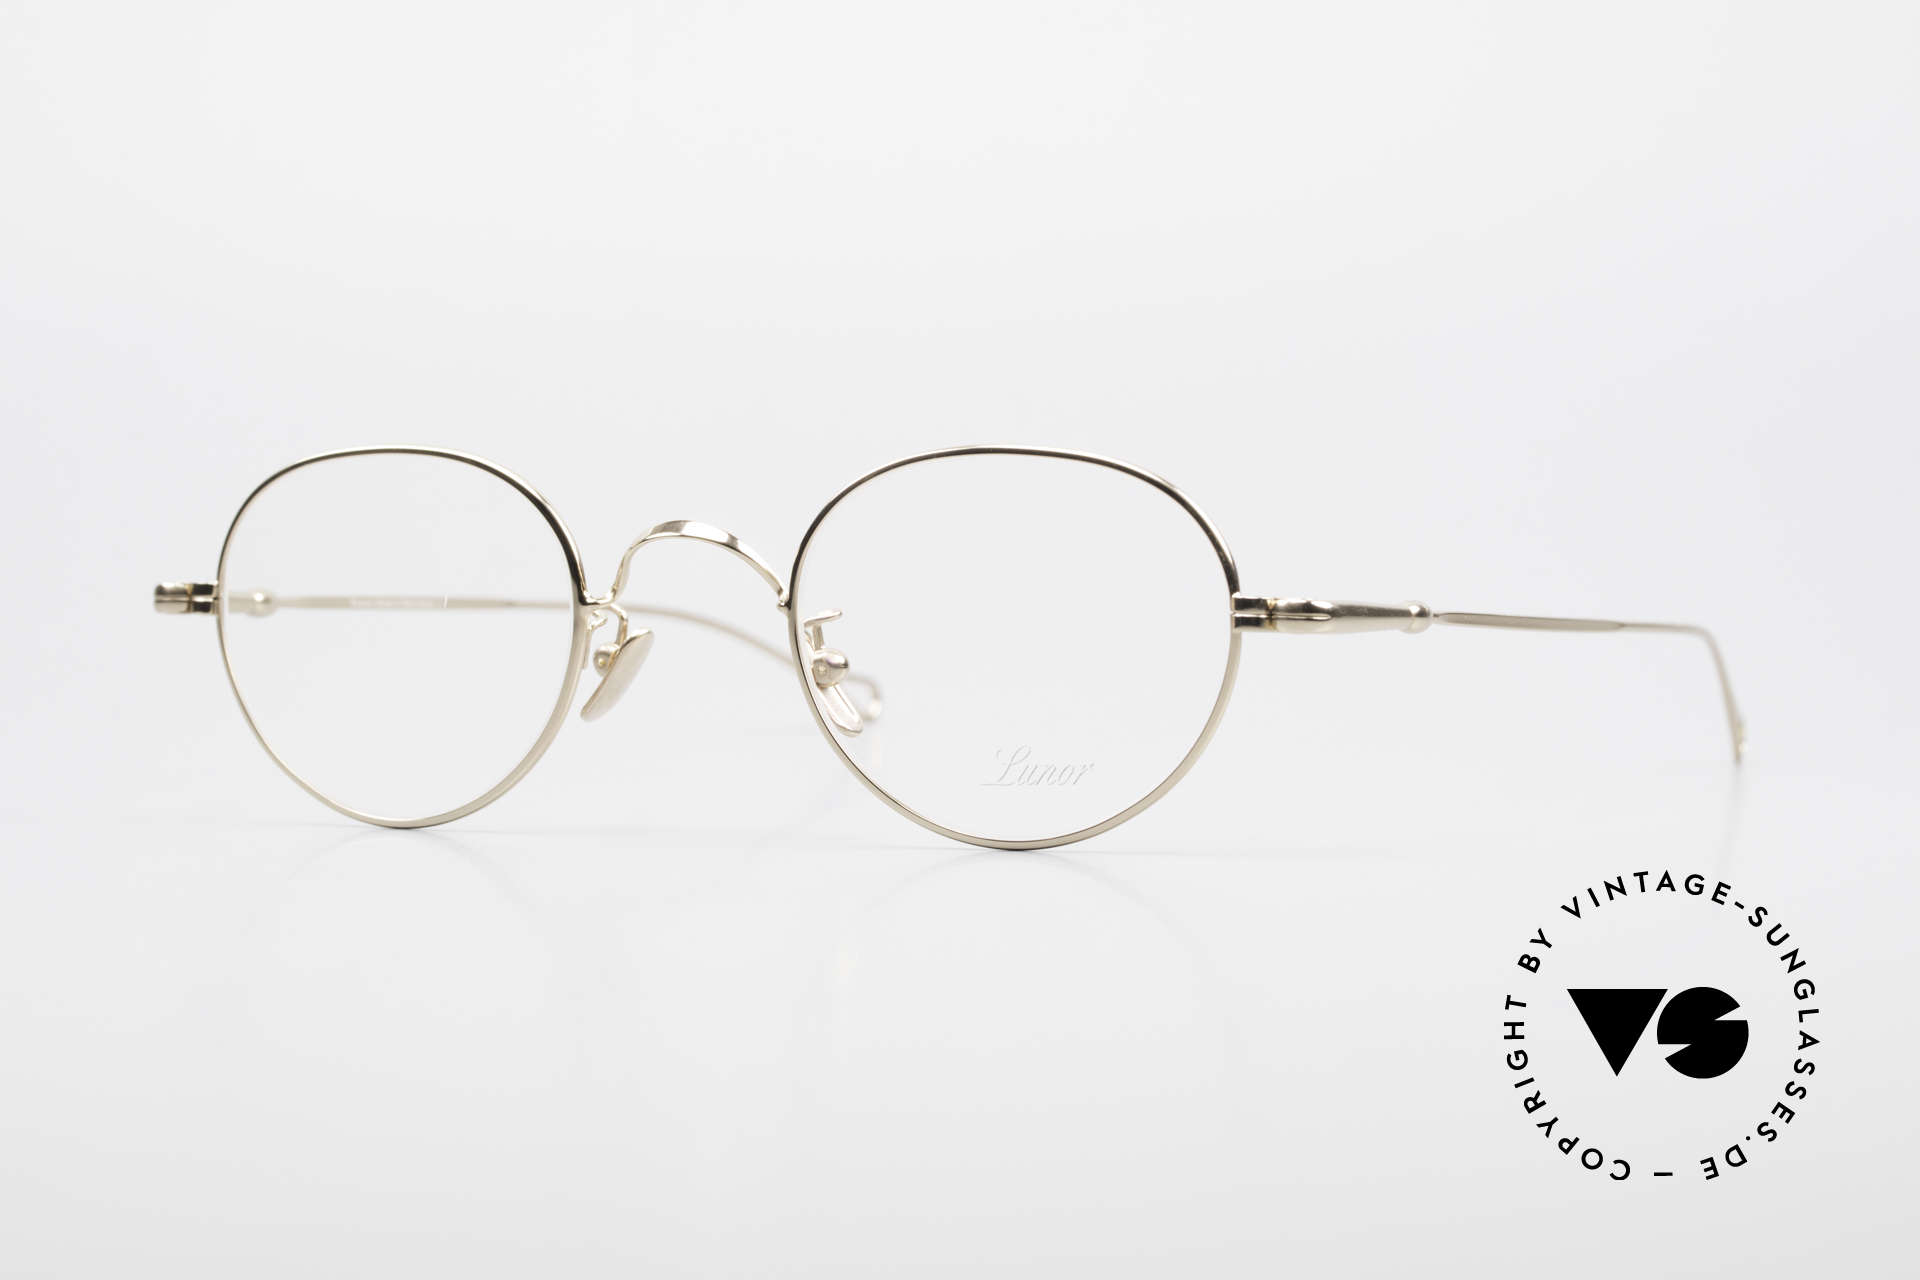 Lunor V 108 Gold Plated Glasses Titanium, LUNOR: honest craftsmanship with attention to details, Made for Men